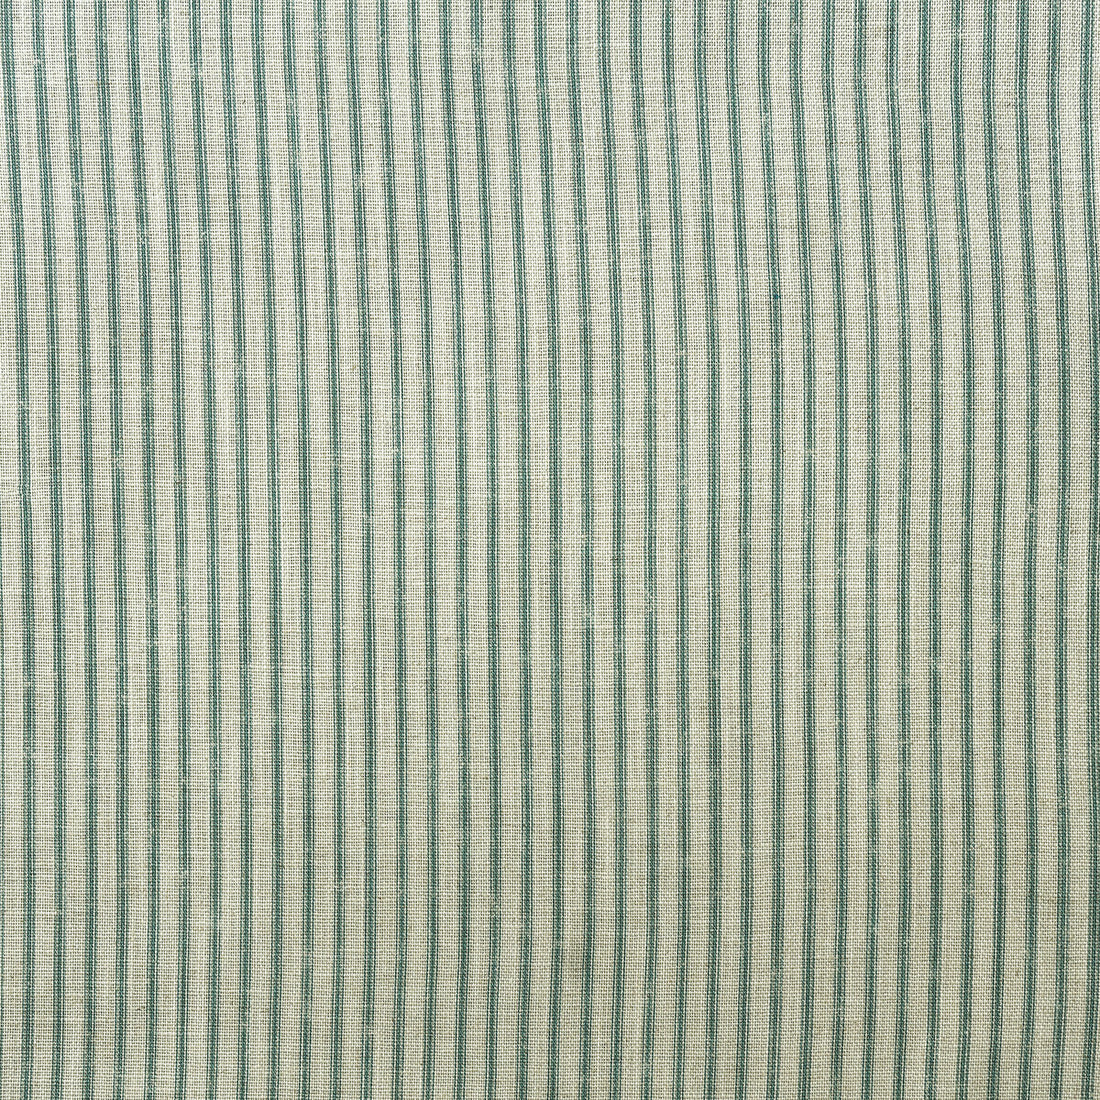 Picket fabric in turquoise color - pattern AM100382.13.0 - by Kravet Couture in the Andrew Martin Garden Path collection